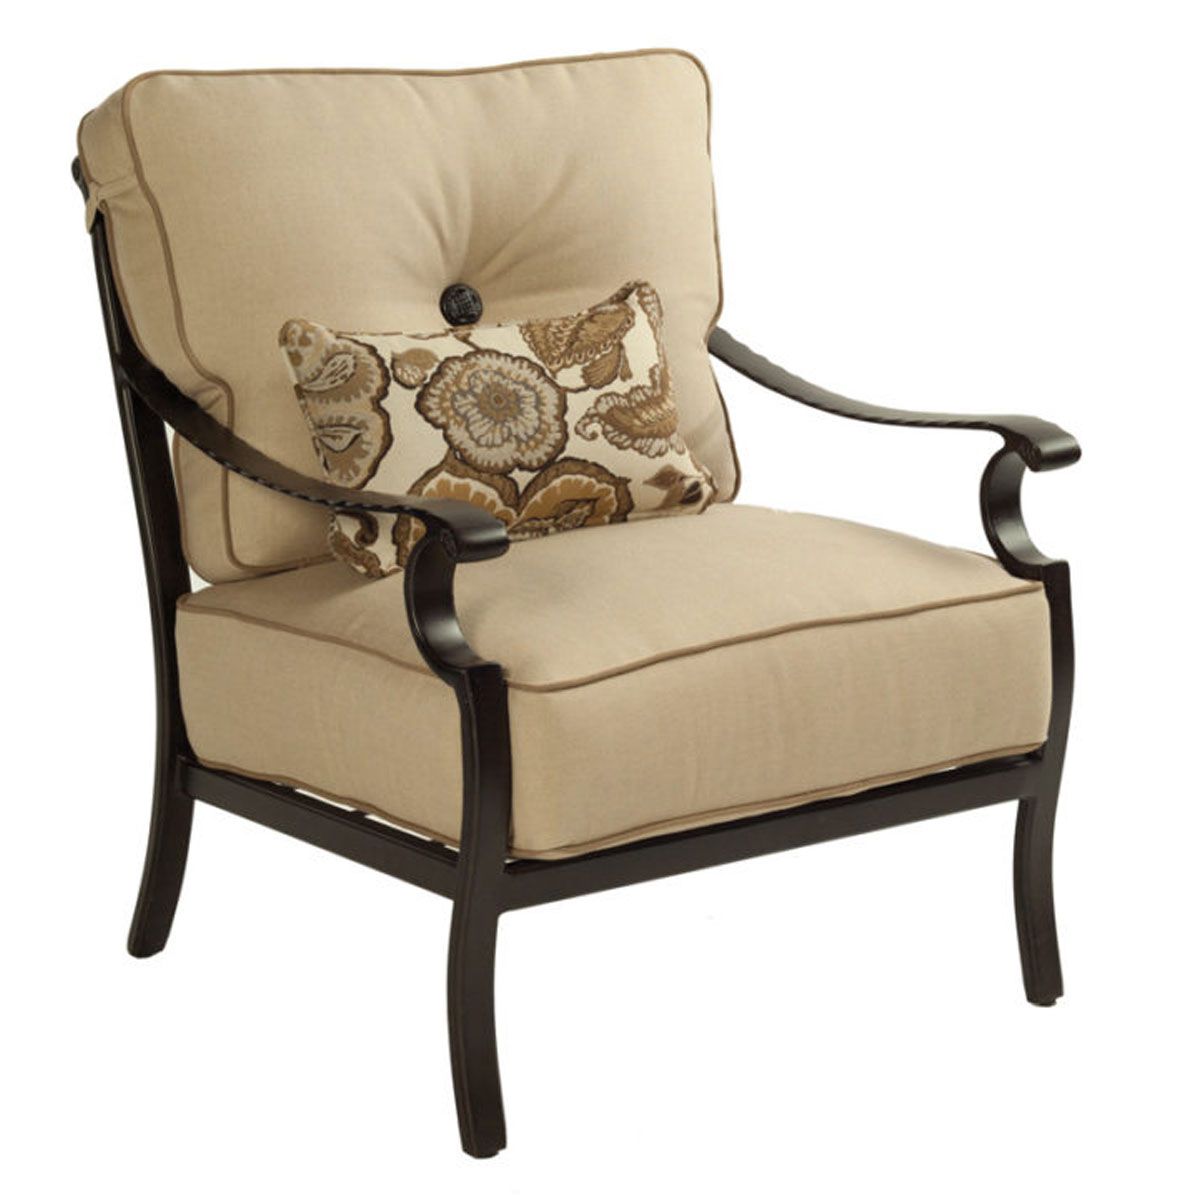 Castelle Monterey Cushioned Lounge Chair